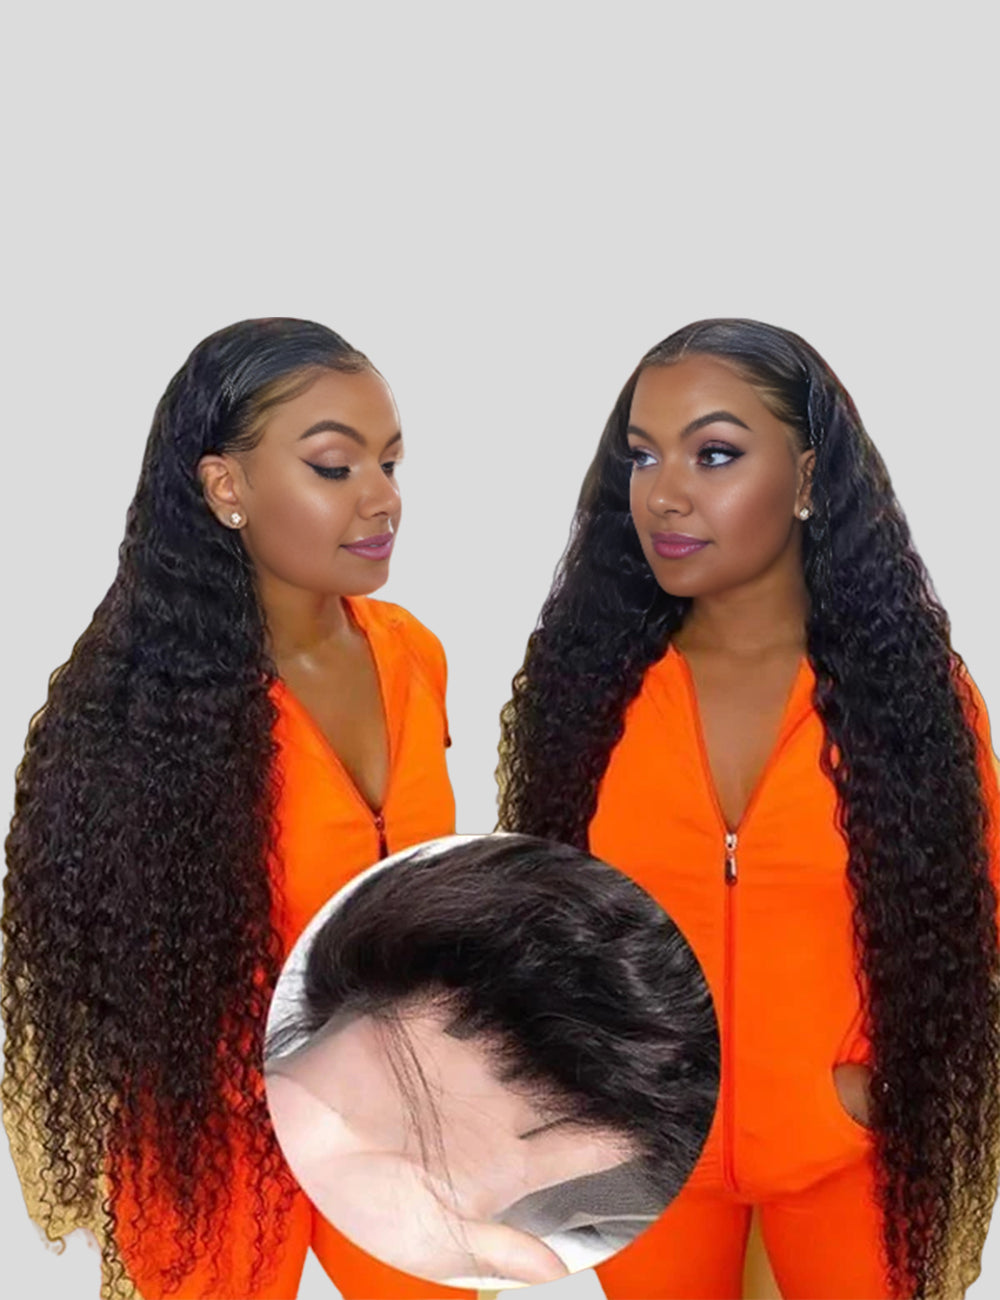 Long HD Undetectable 32&quot; 34&quot; 36&quot; 38&quot; 40&quot; Glueless Human Hair Wigs, 180% Density 13x4 Straight Body Wave Loose Deep Wave Curly Lace Front Wig